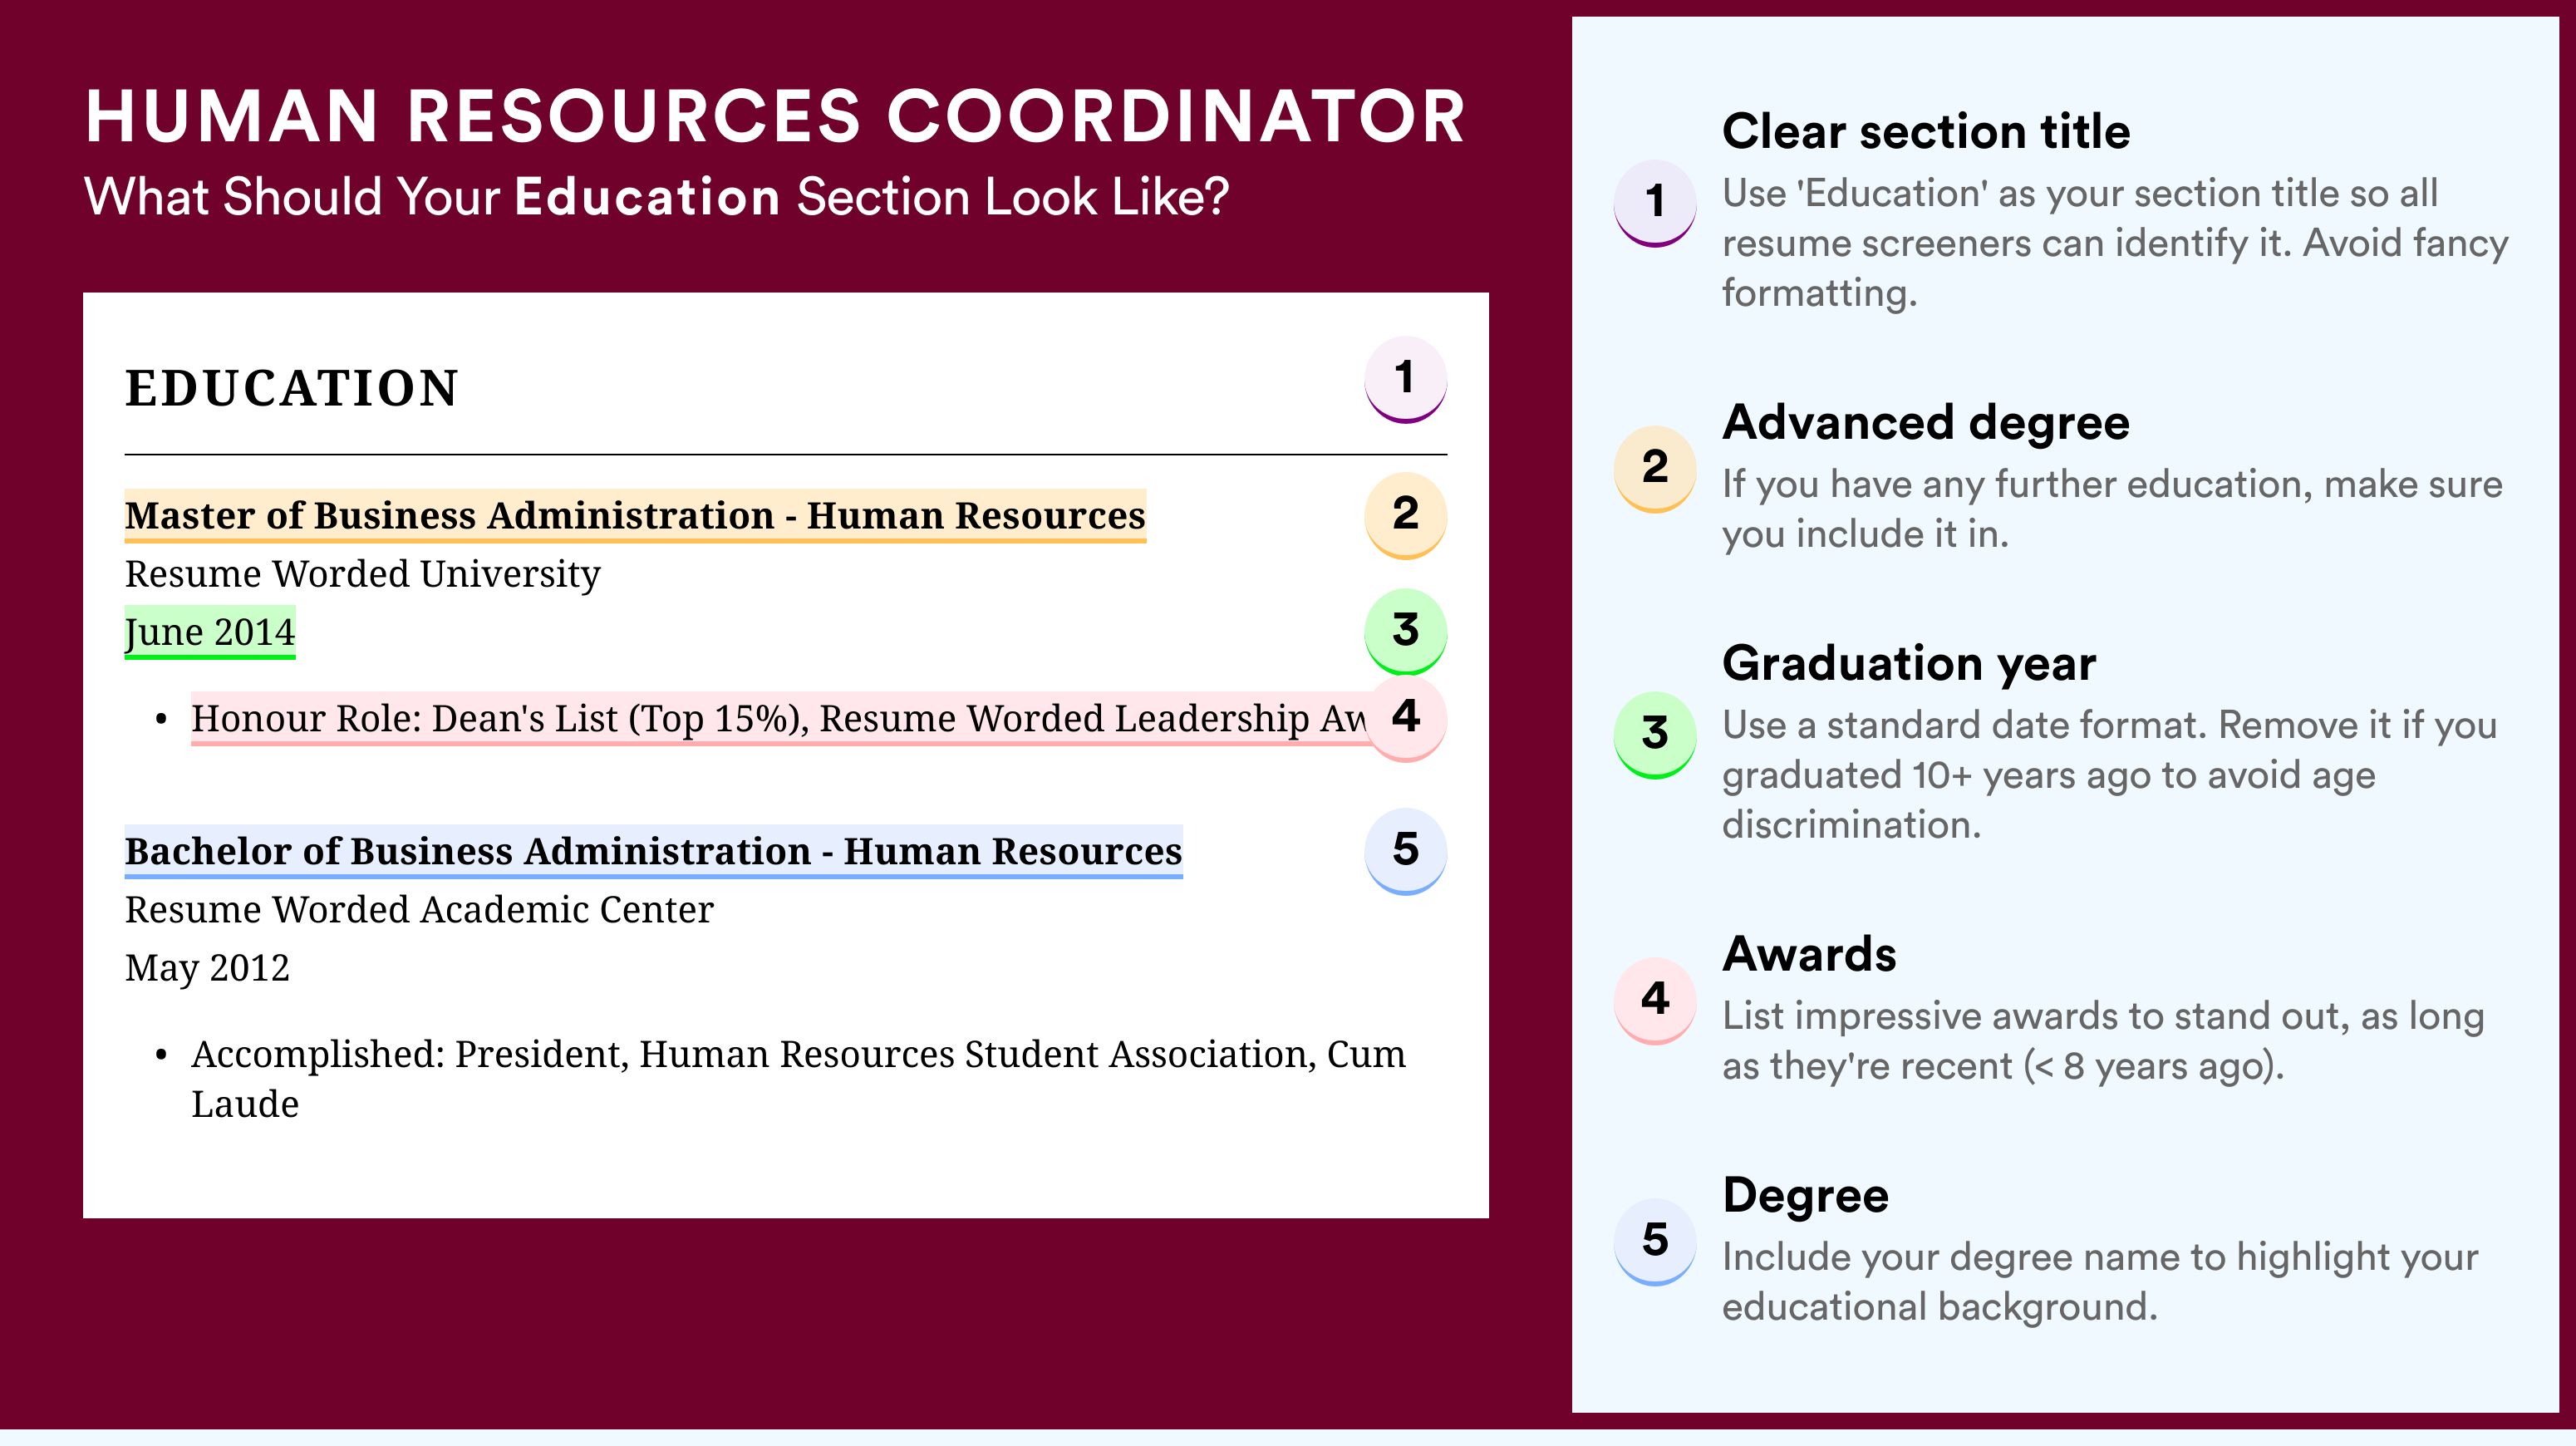 How To Write An Education Section - Human Resources Coordinator Roles